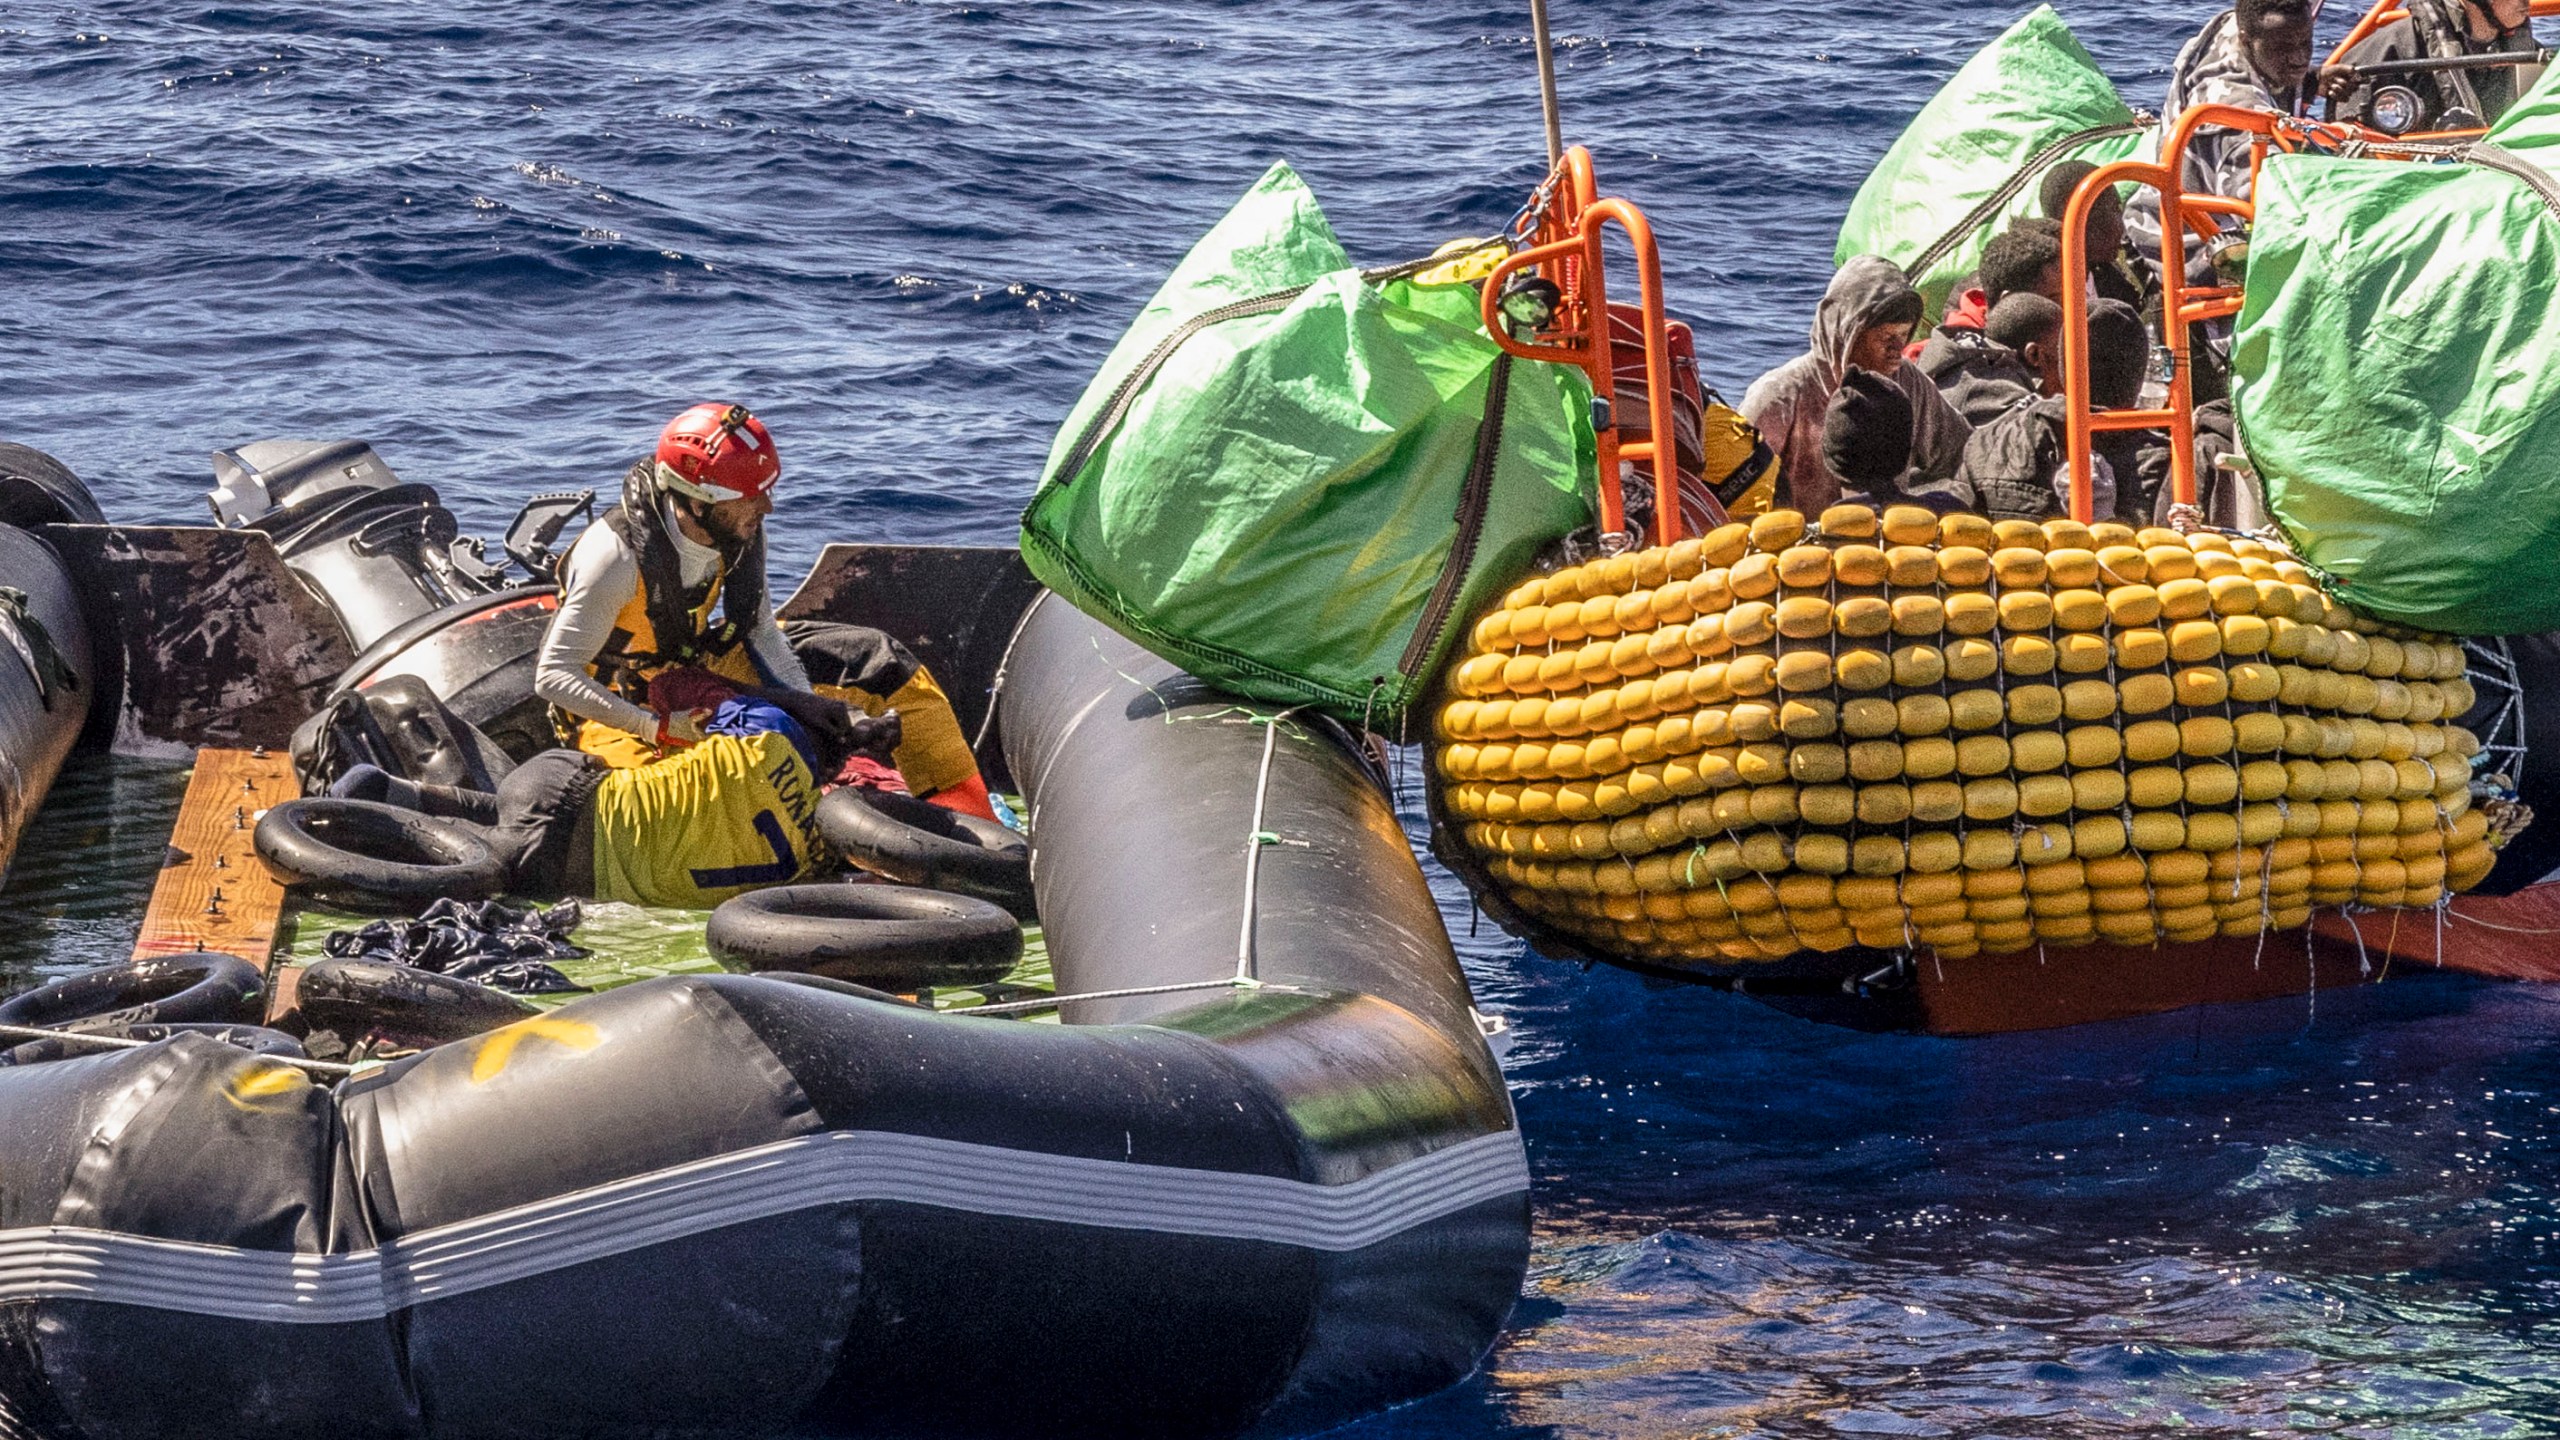 A migrant is helped evacuate a partially deflated rubber dinghy by the rescue personnel of the SOS Mediterranee humanitarian ship Ocean Viking in the Central Mediterranean Sea, Wednesday, March 13, 2024, Survivors reported that some 50 people who departed Libya with them a week ago had perished during the journey. (Johanna de Tessieres/ SOS Mediterranee via AP, HO)